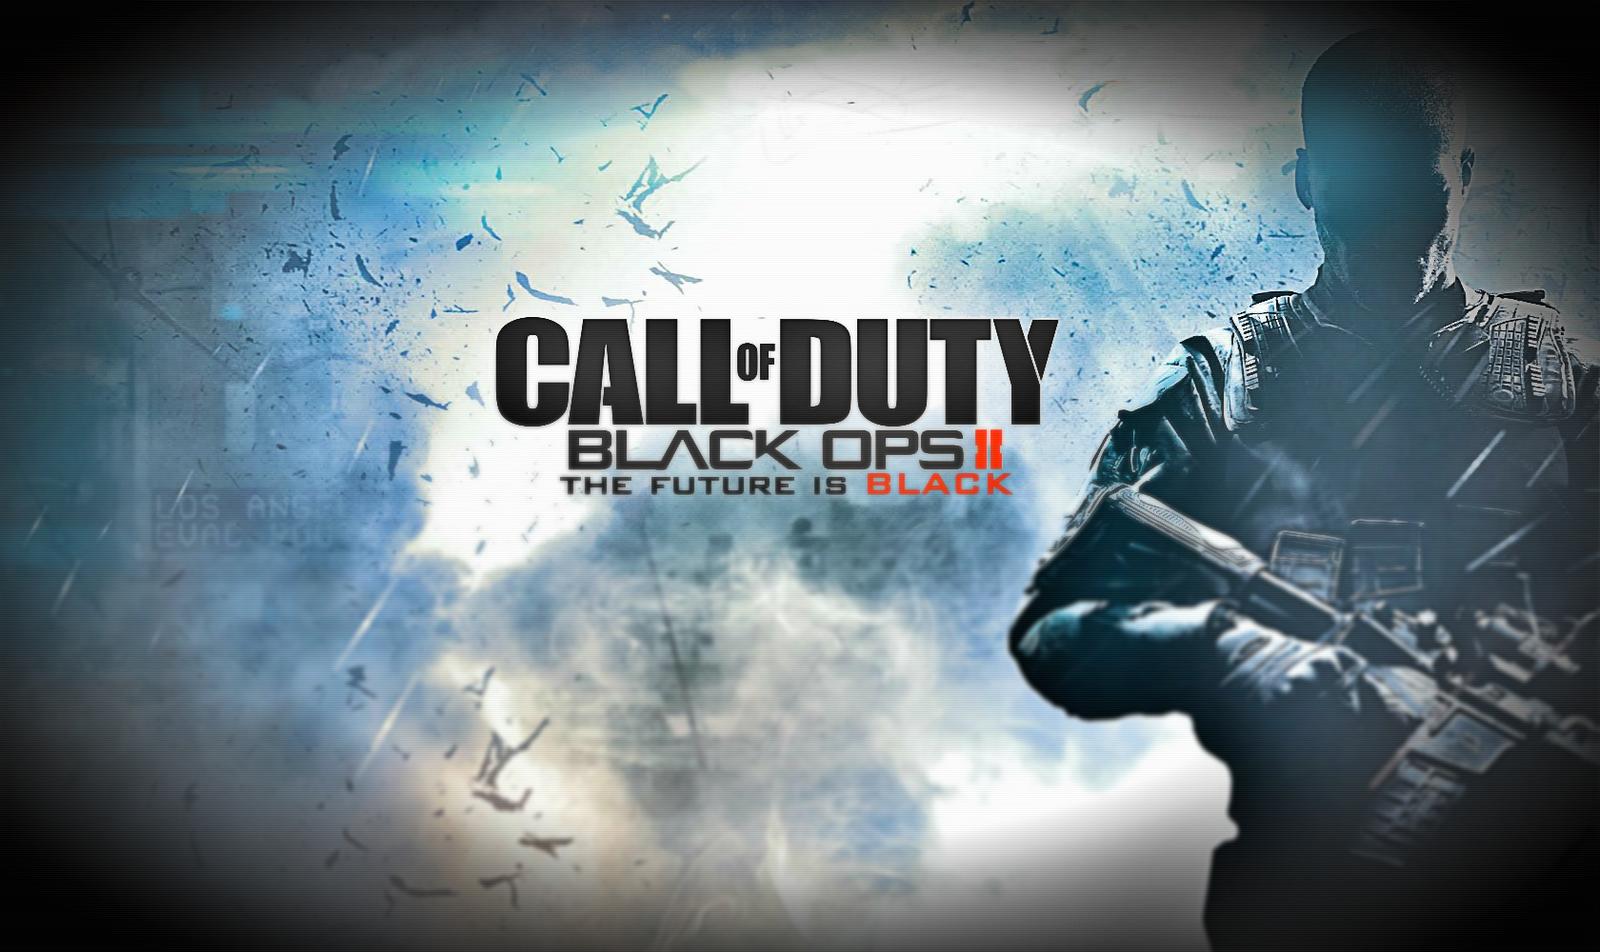 HD WALLPAPERS Call of Duty Black ops 2K Wallpapers